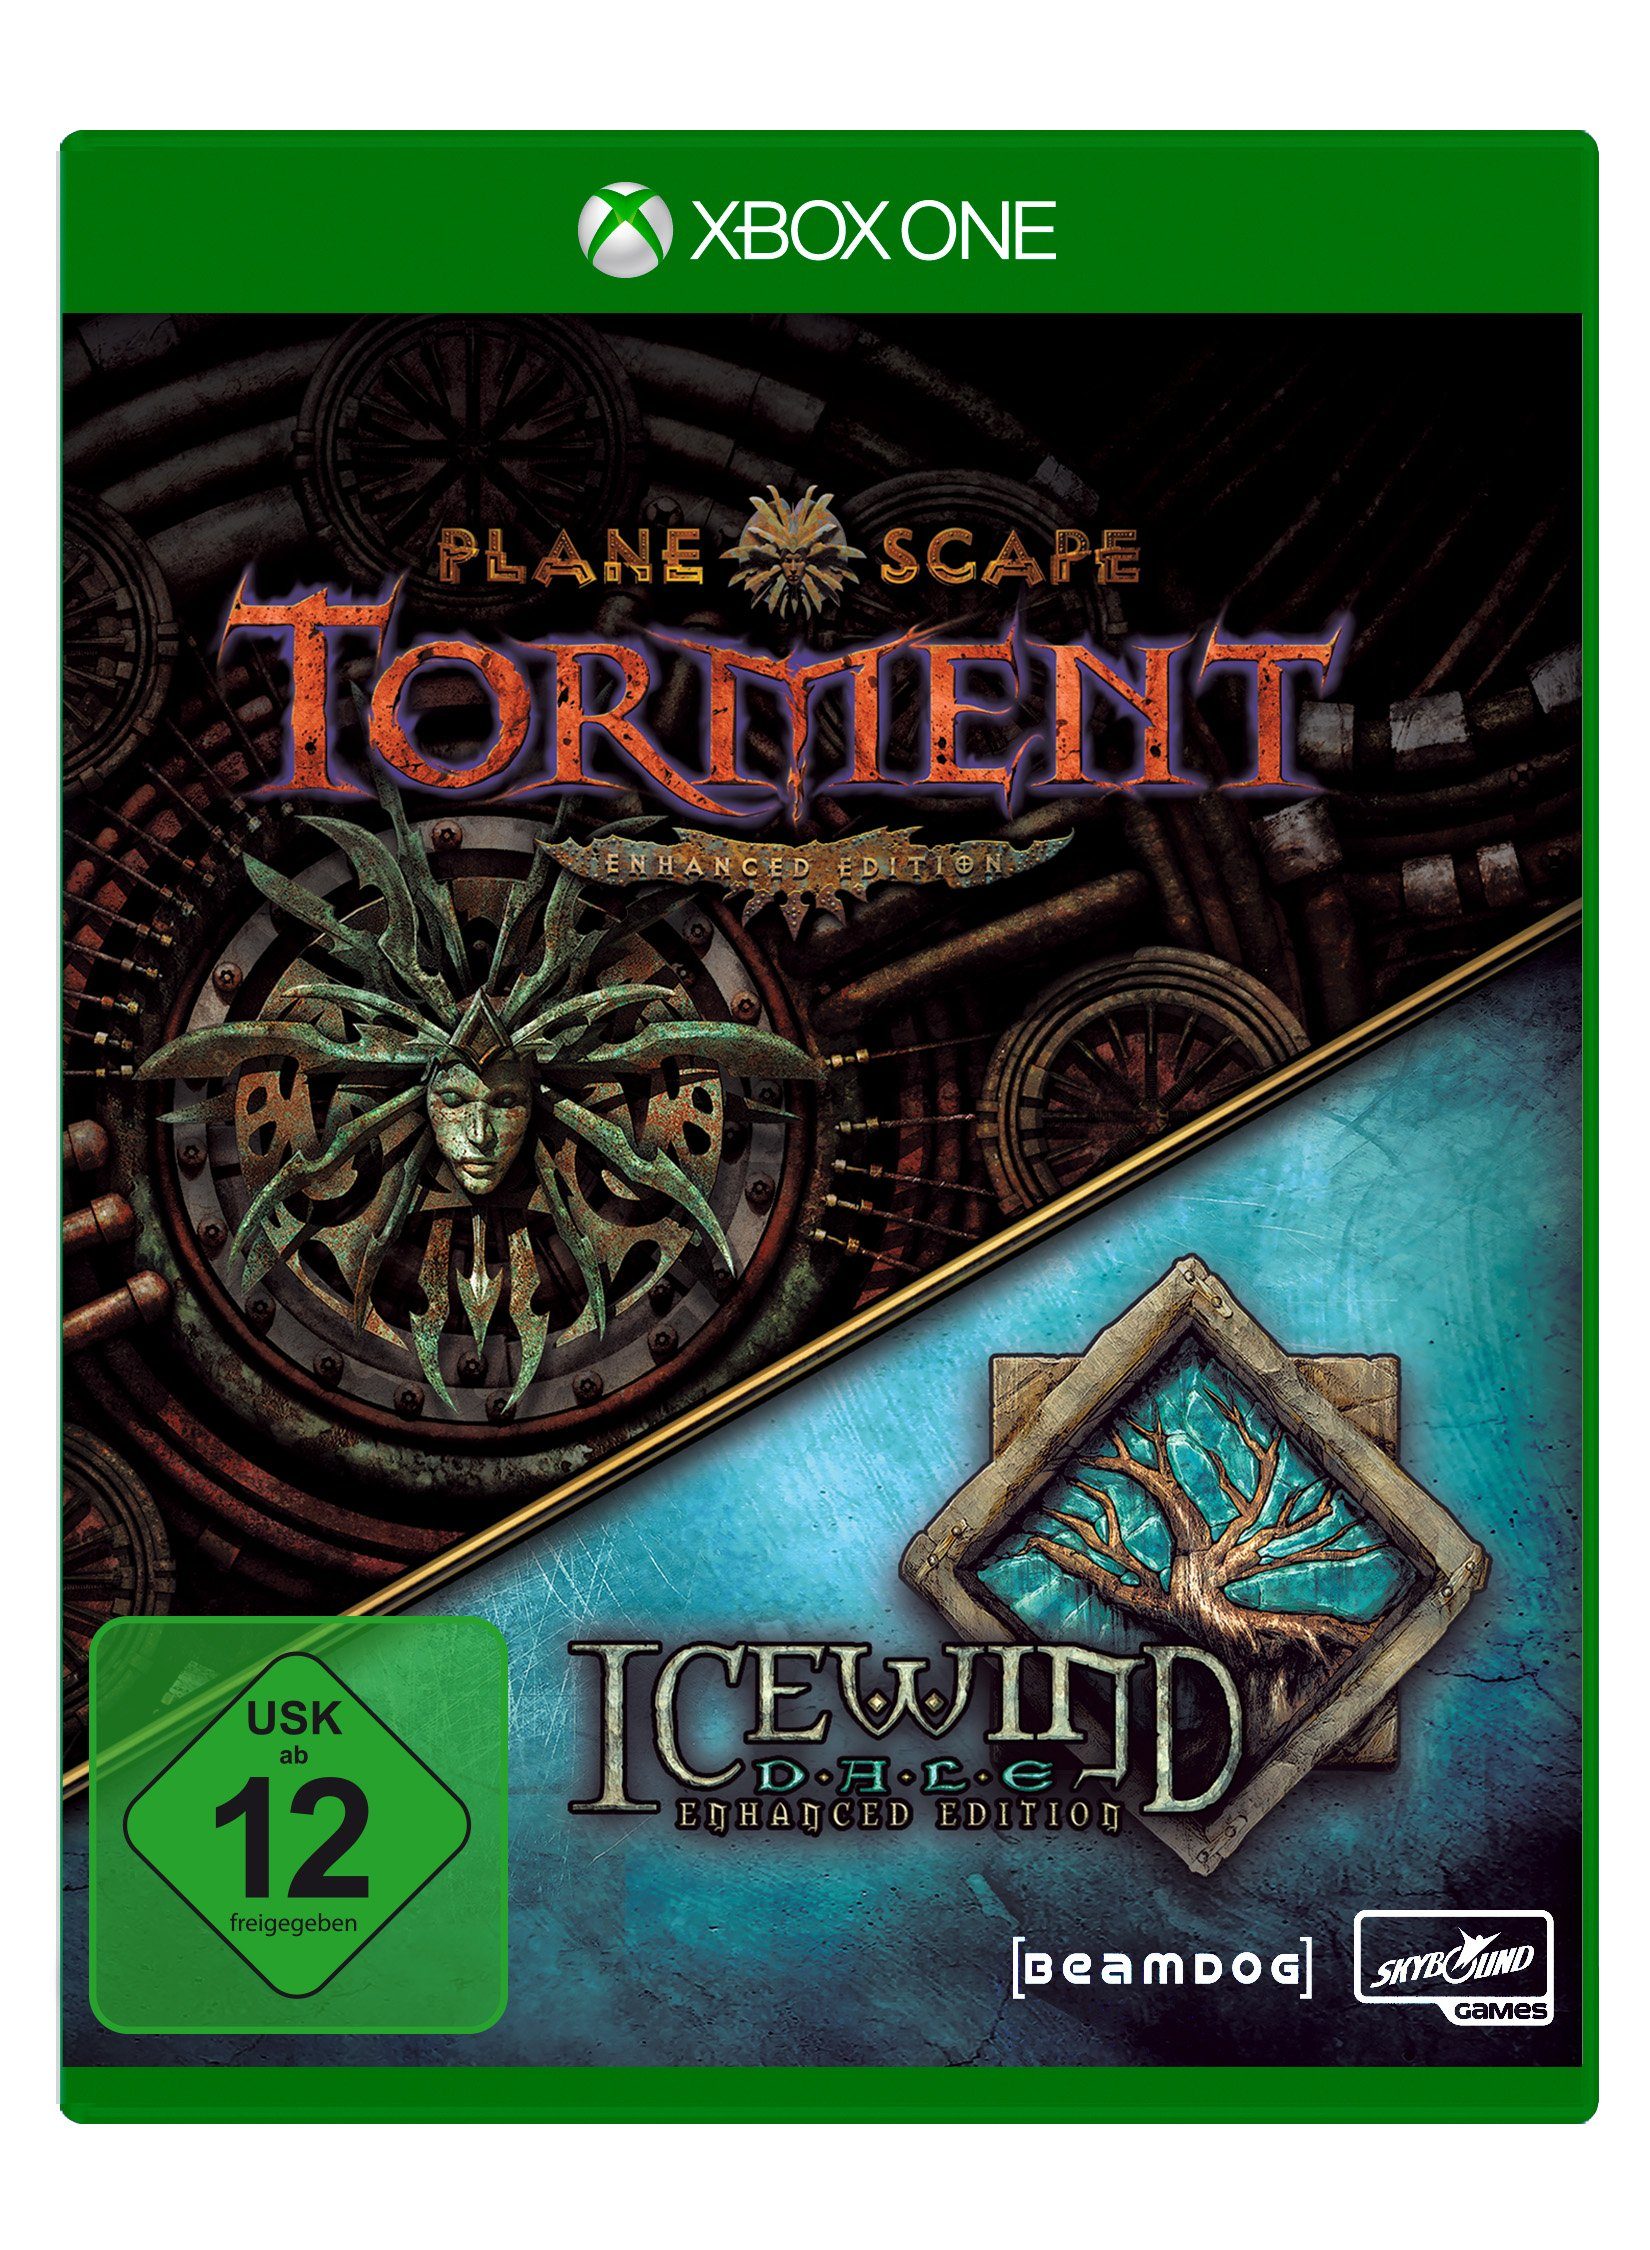 Planescape: Torment Icewind One & Xbox